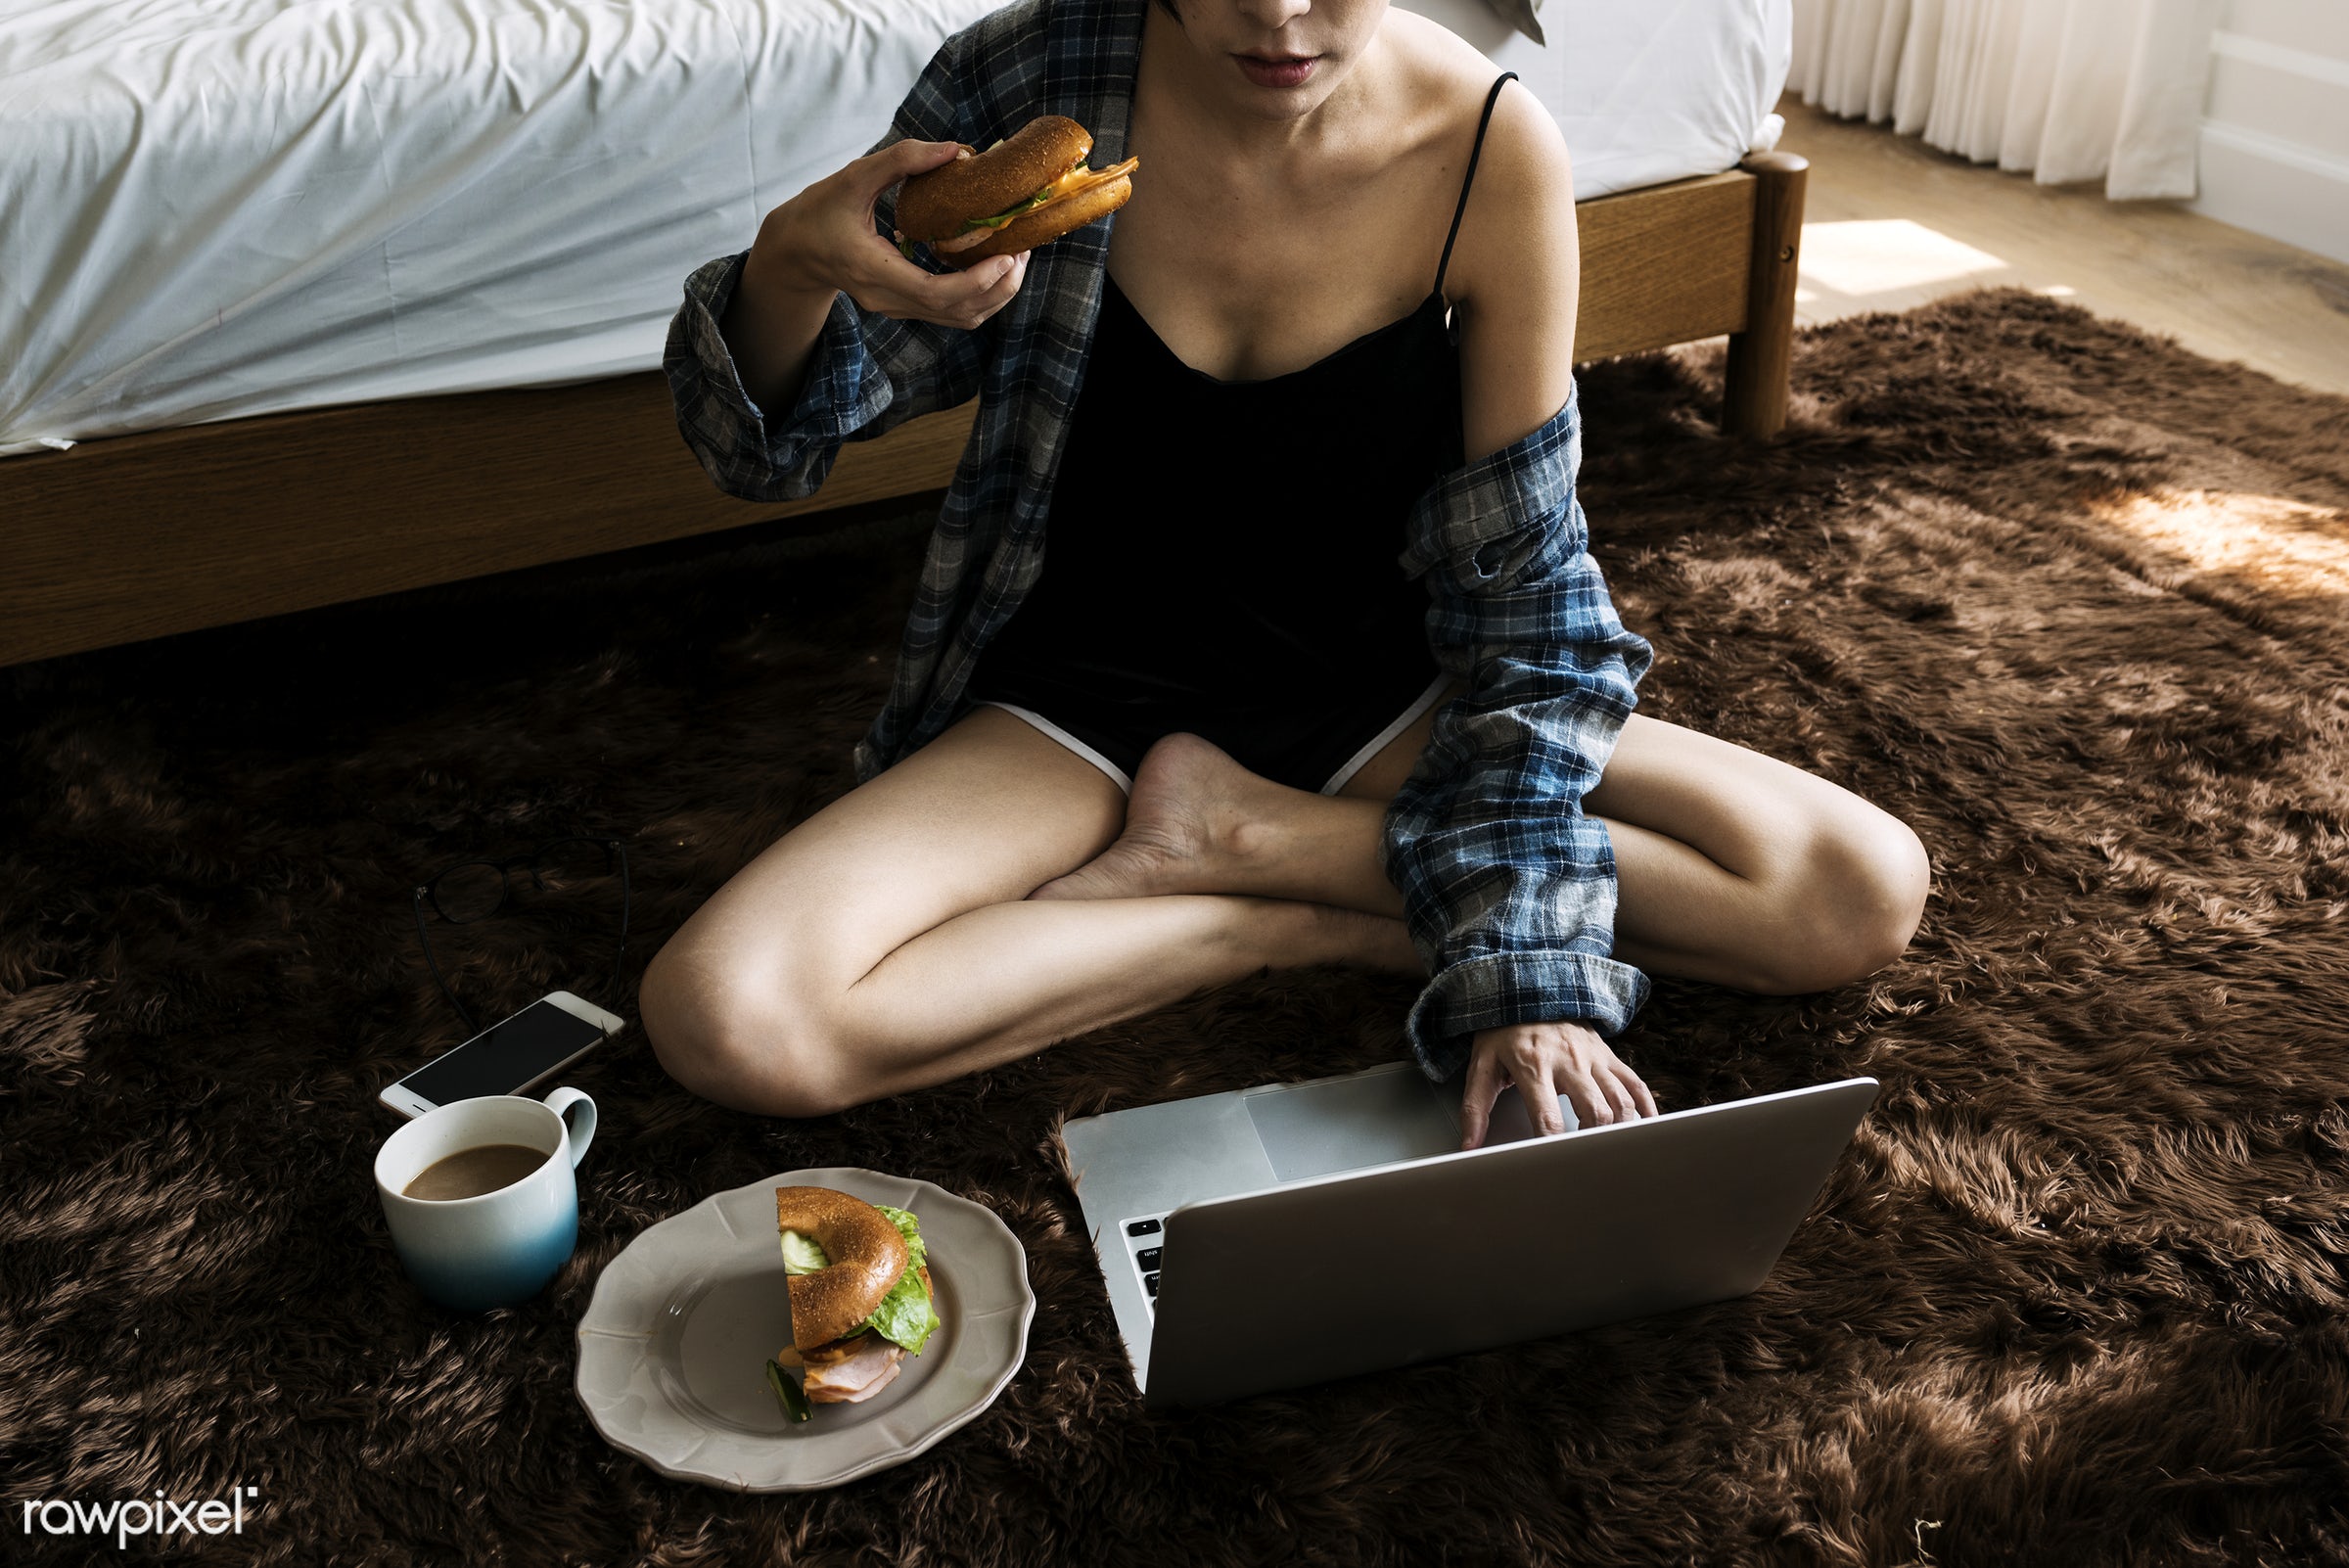 Sexy woman eating food in underwear